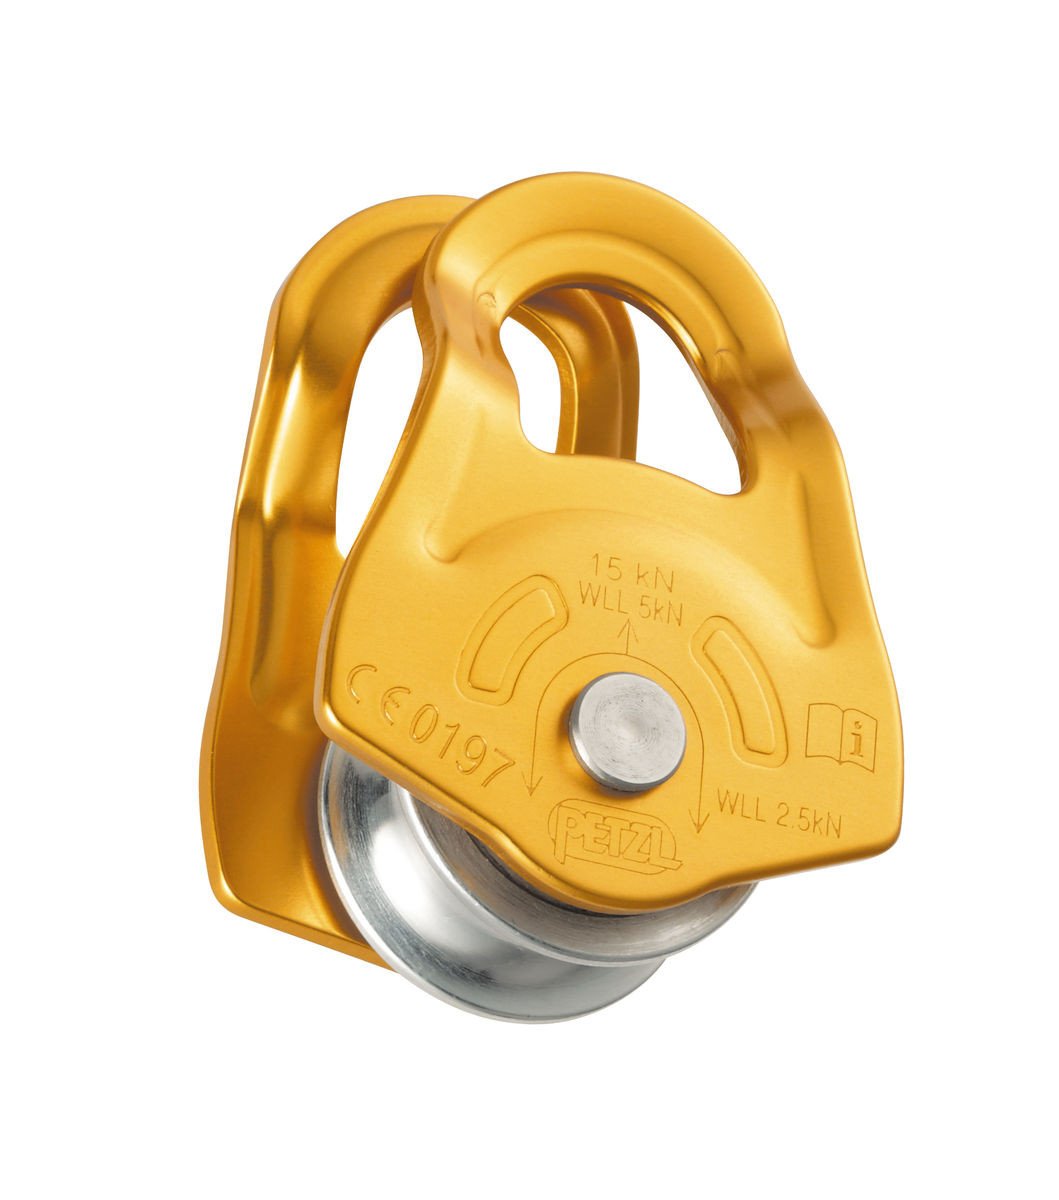 This Versatile ultra-compact pulley is a lightweight compact pulley design for a variety of uses.